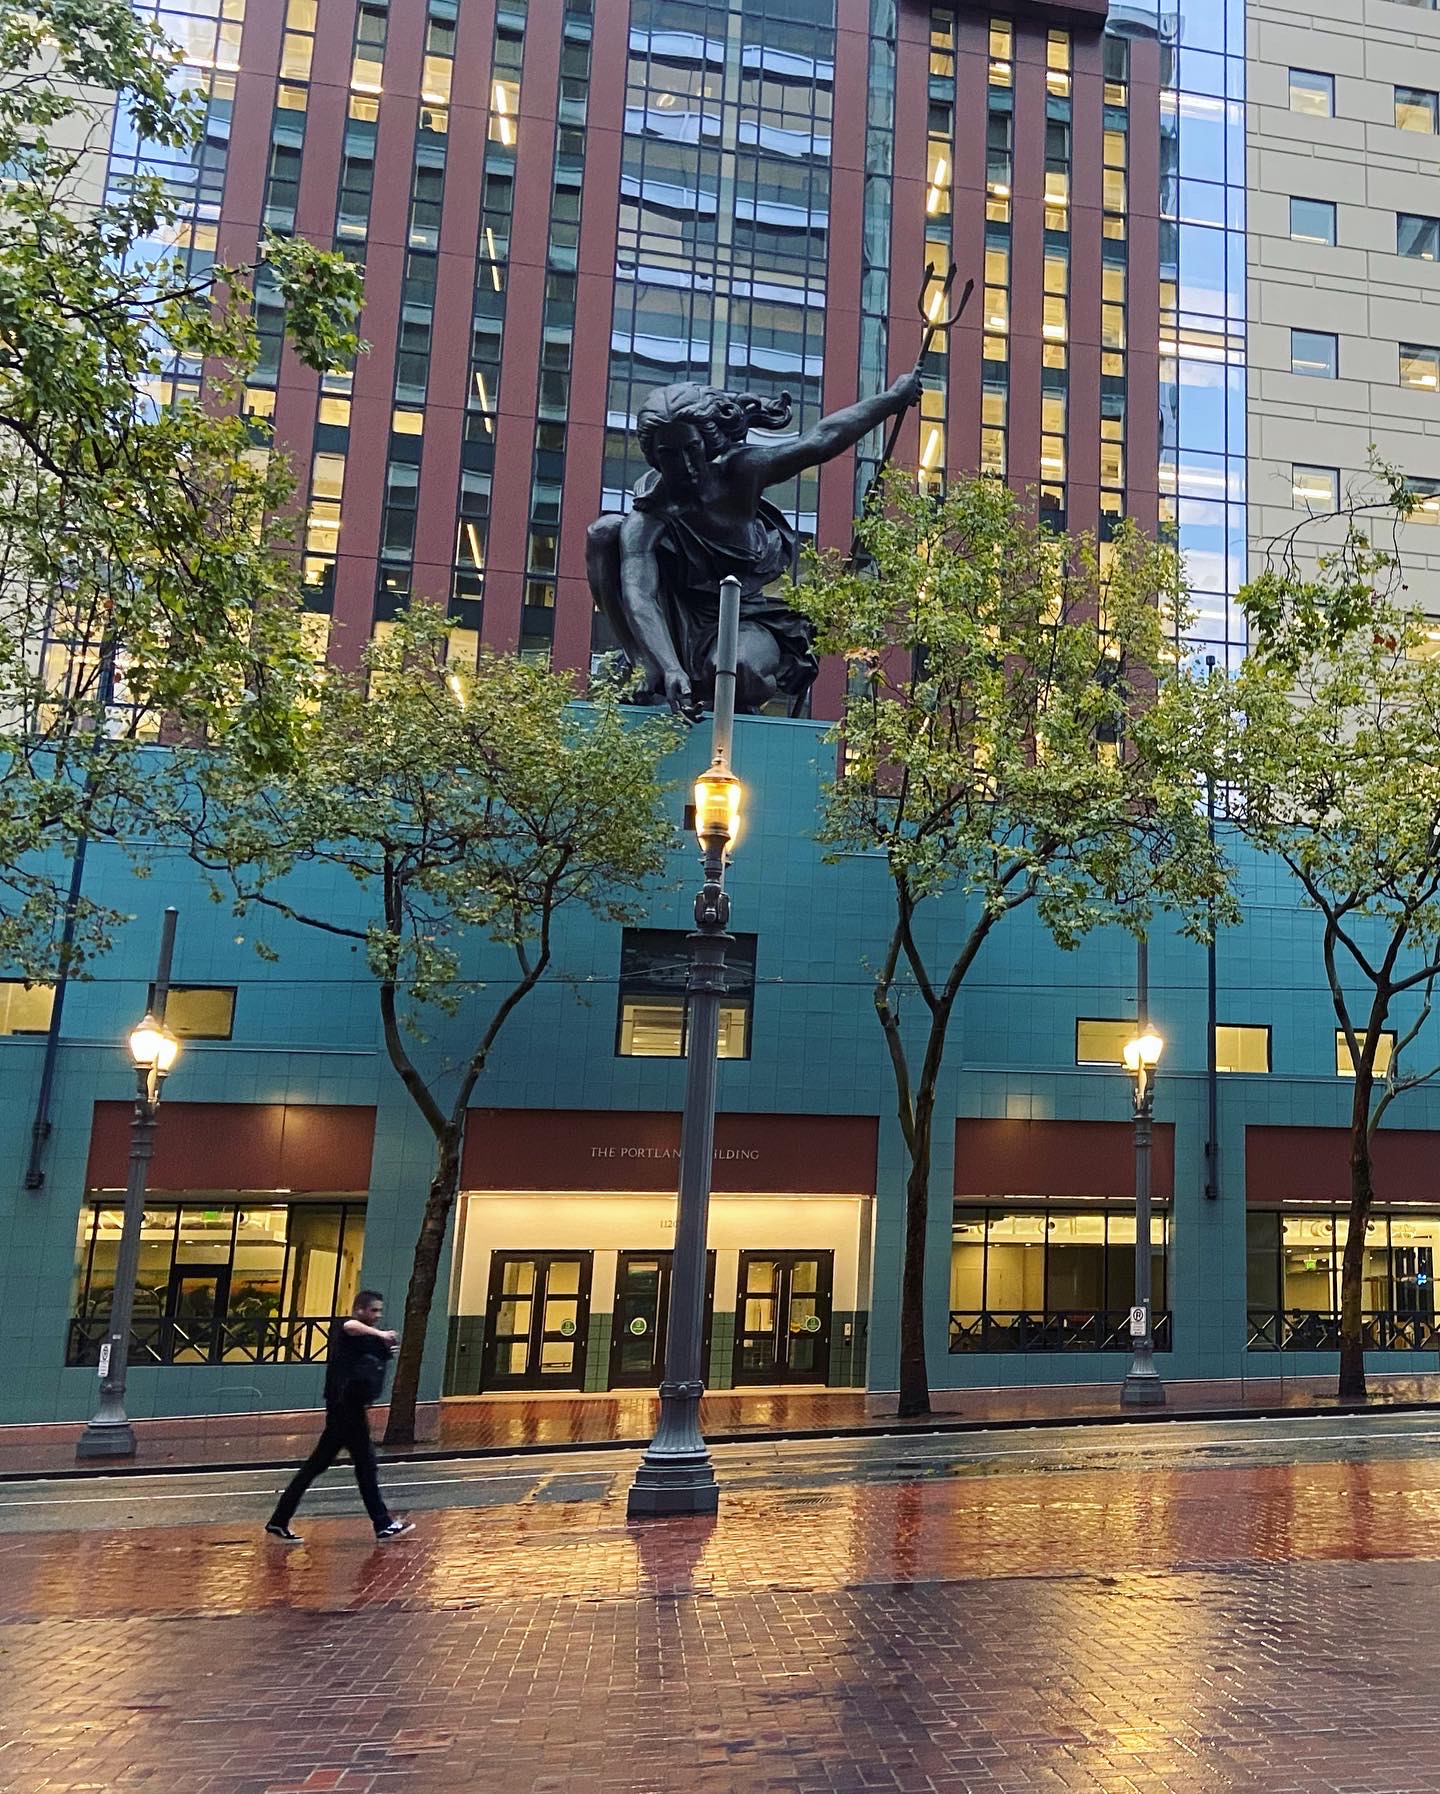 a rainy sidewalk reflects the lights and building above it, topped with a copper repousse figure holding a trident